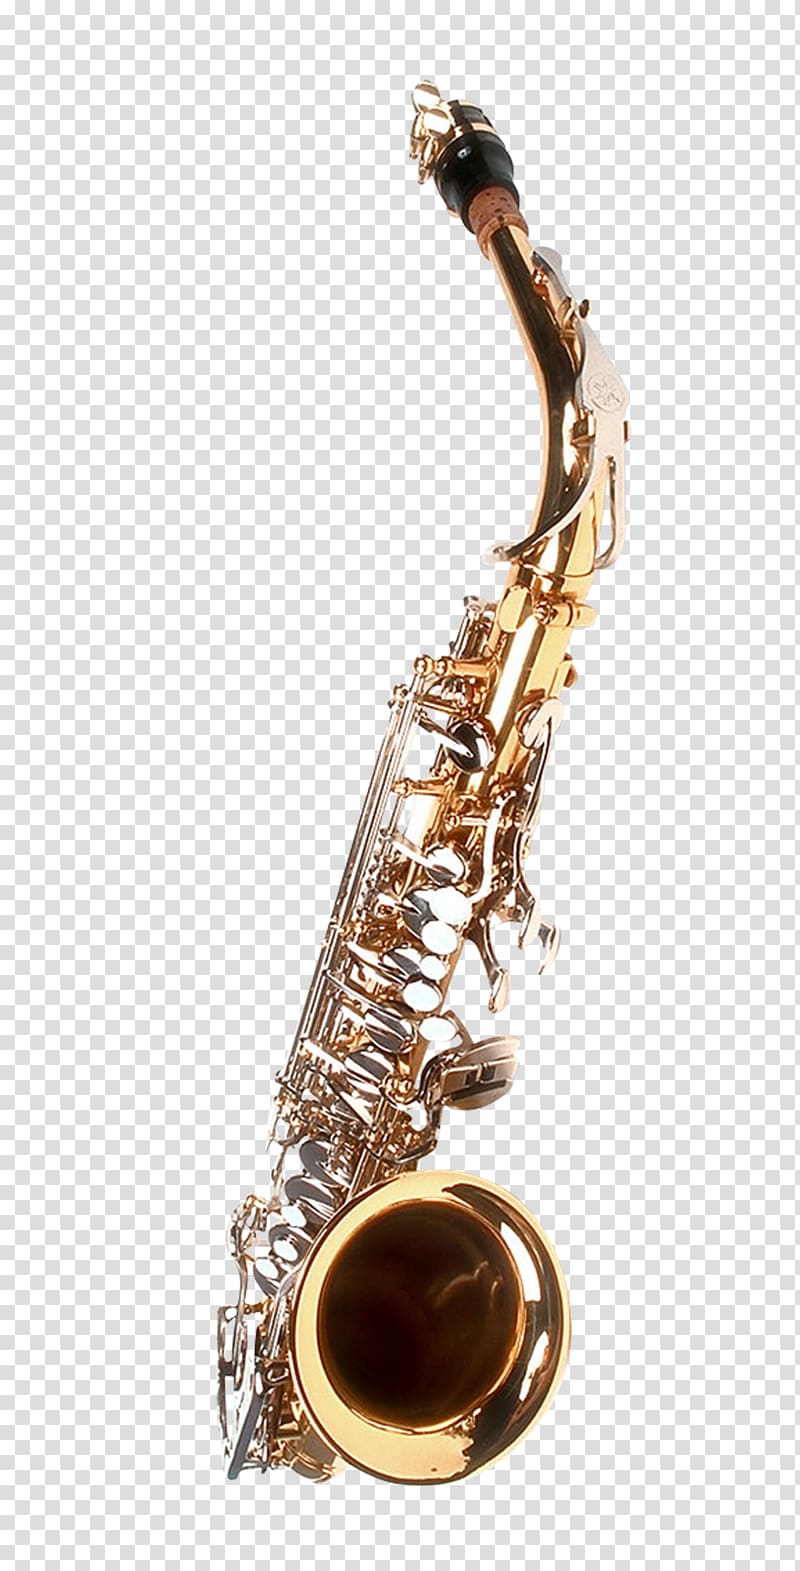 Baritone saxophone Musical instrument , Musical instruments saxophone transparent background PNG clipart